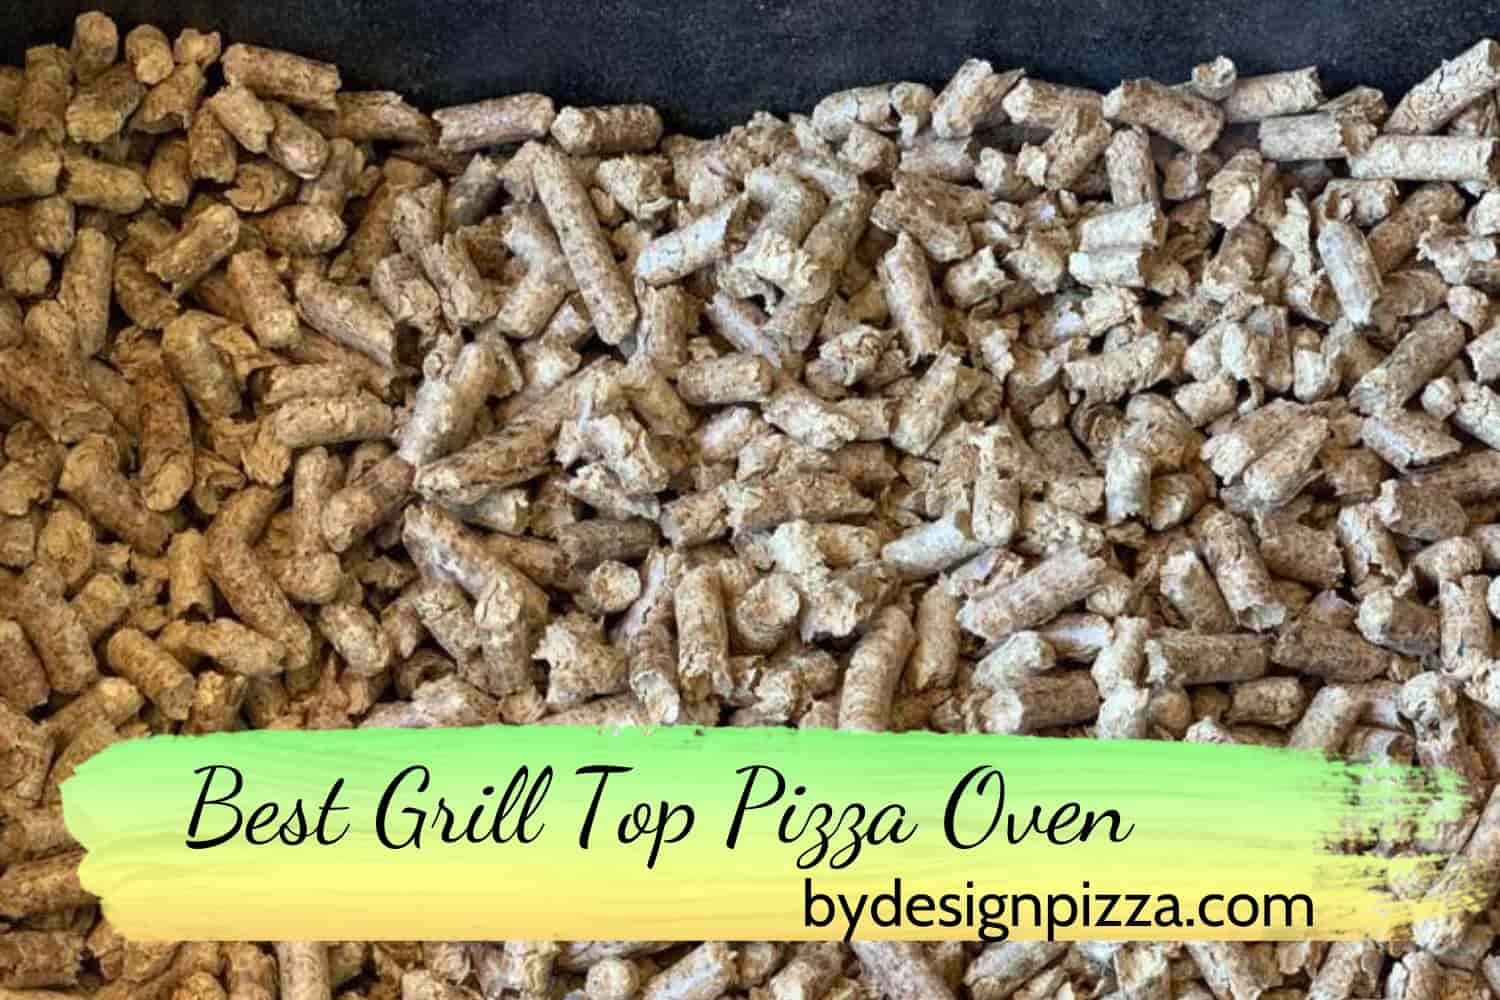 Best Wood Pellets for Pizza Oven